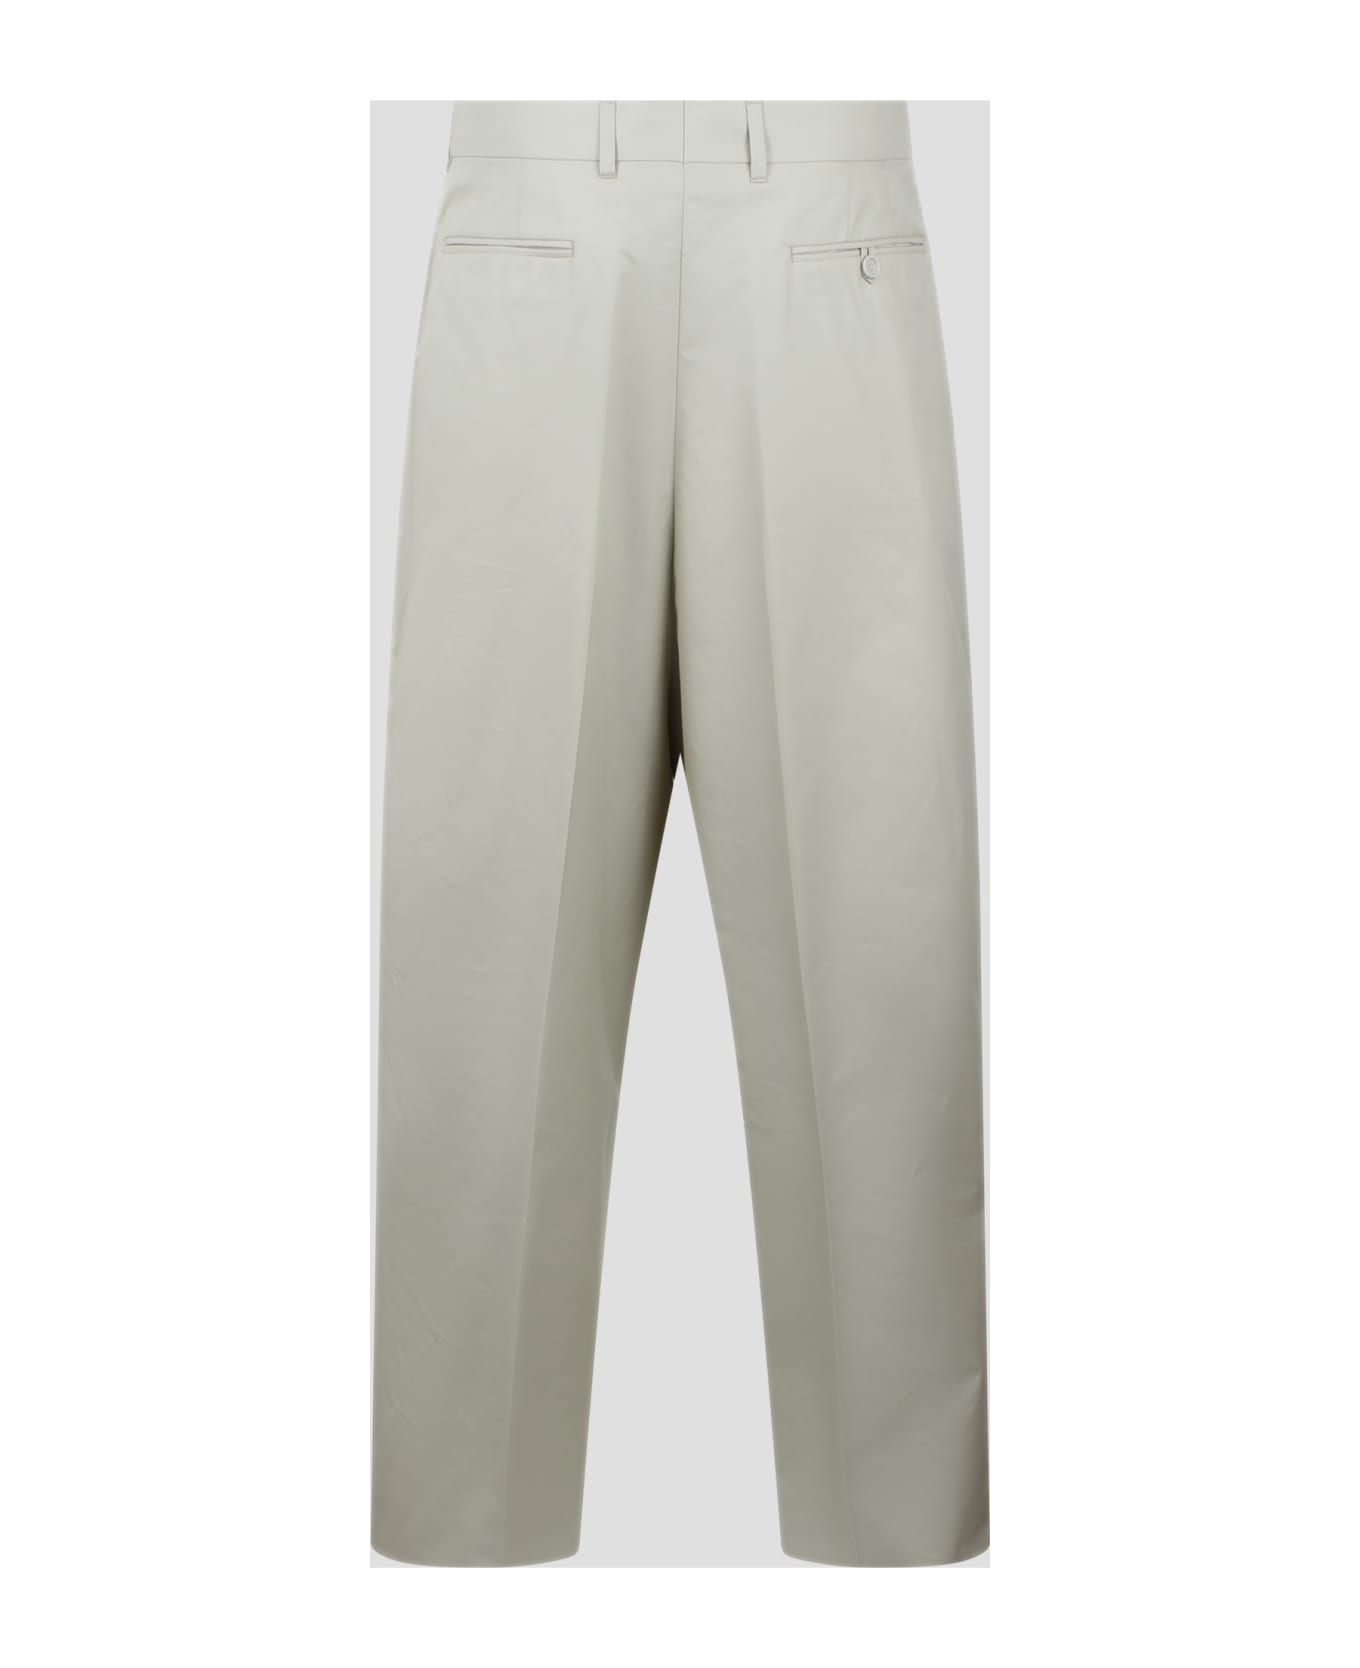 Dior Pleated Pants - Nude & Neutrals